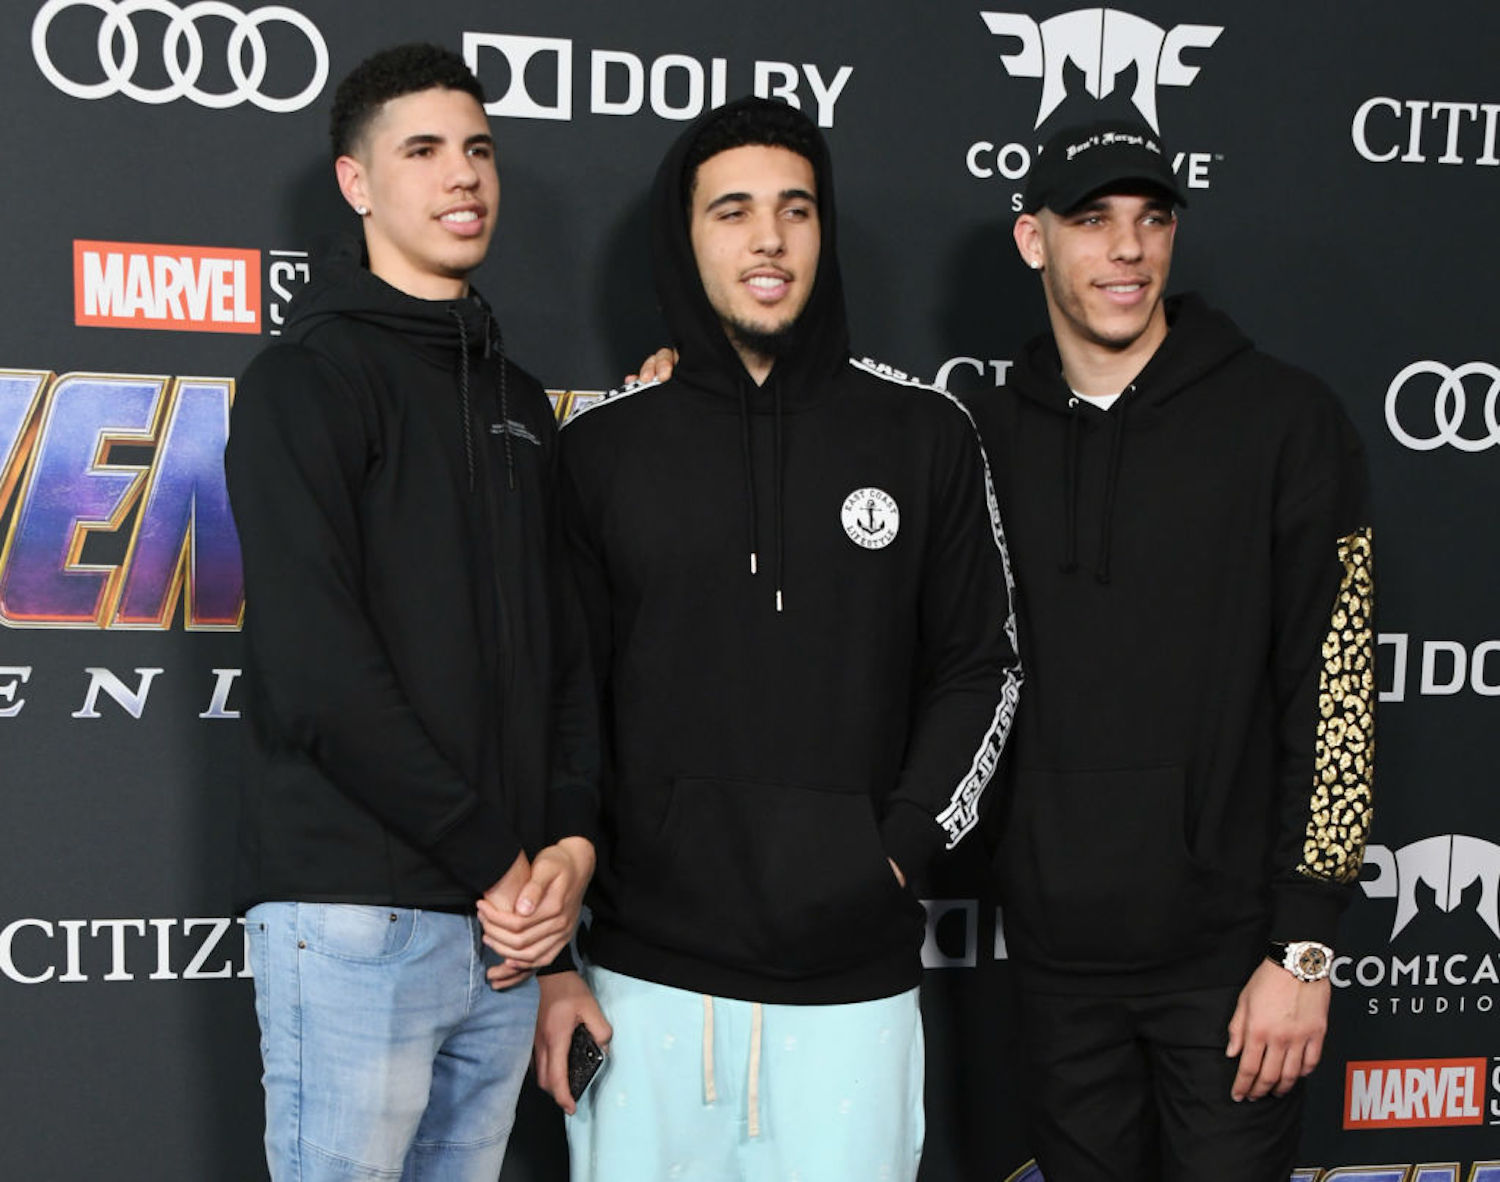 Lonzo and LaMelo Ball enter the 2020-21 NBA season with high expectations, and now they'll be playing against their third brother, LiAngelo.